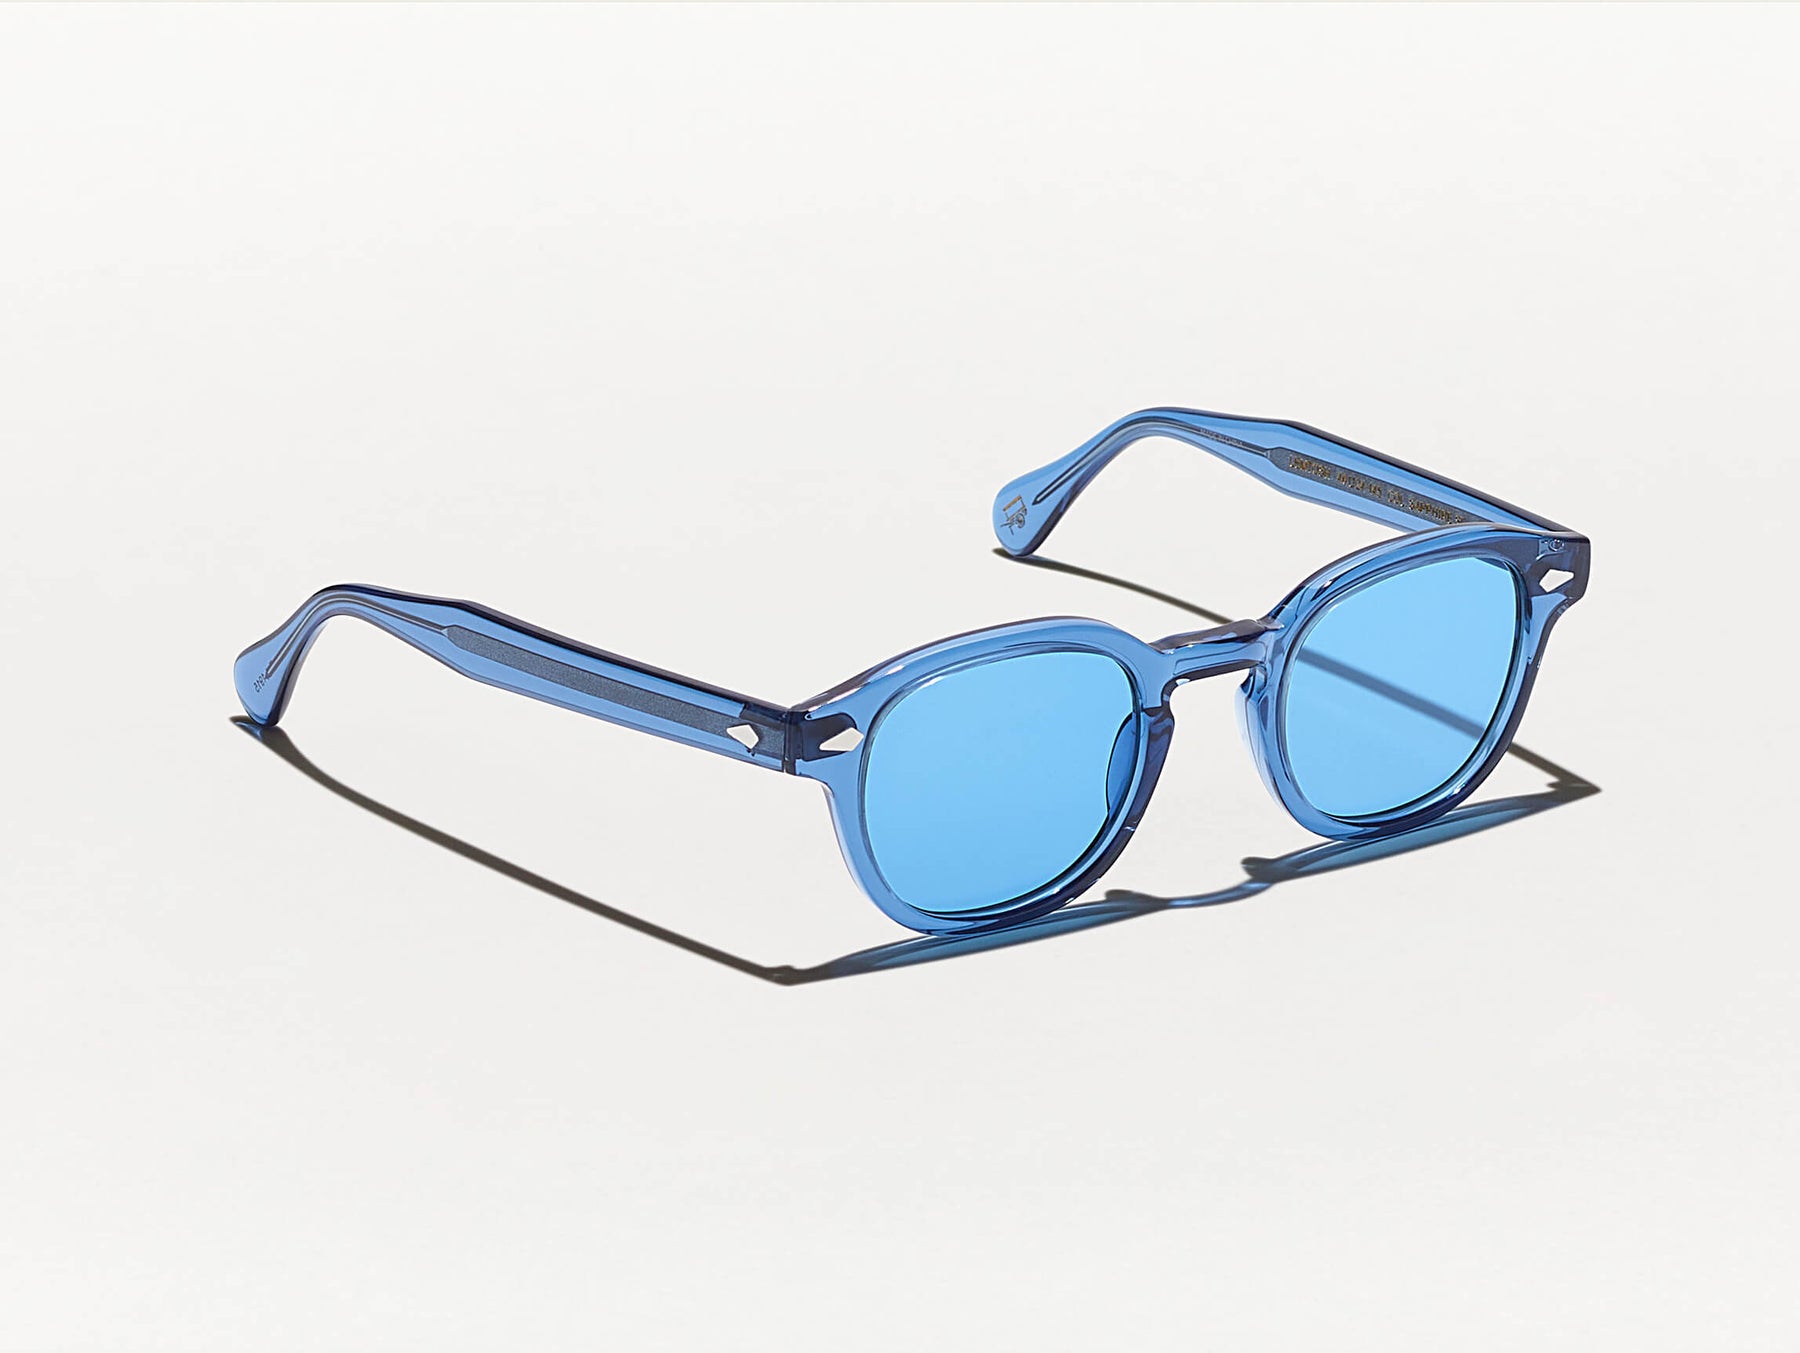 The LEMTOSH in Sapphire with Celebrity Blue Tinted Lenses